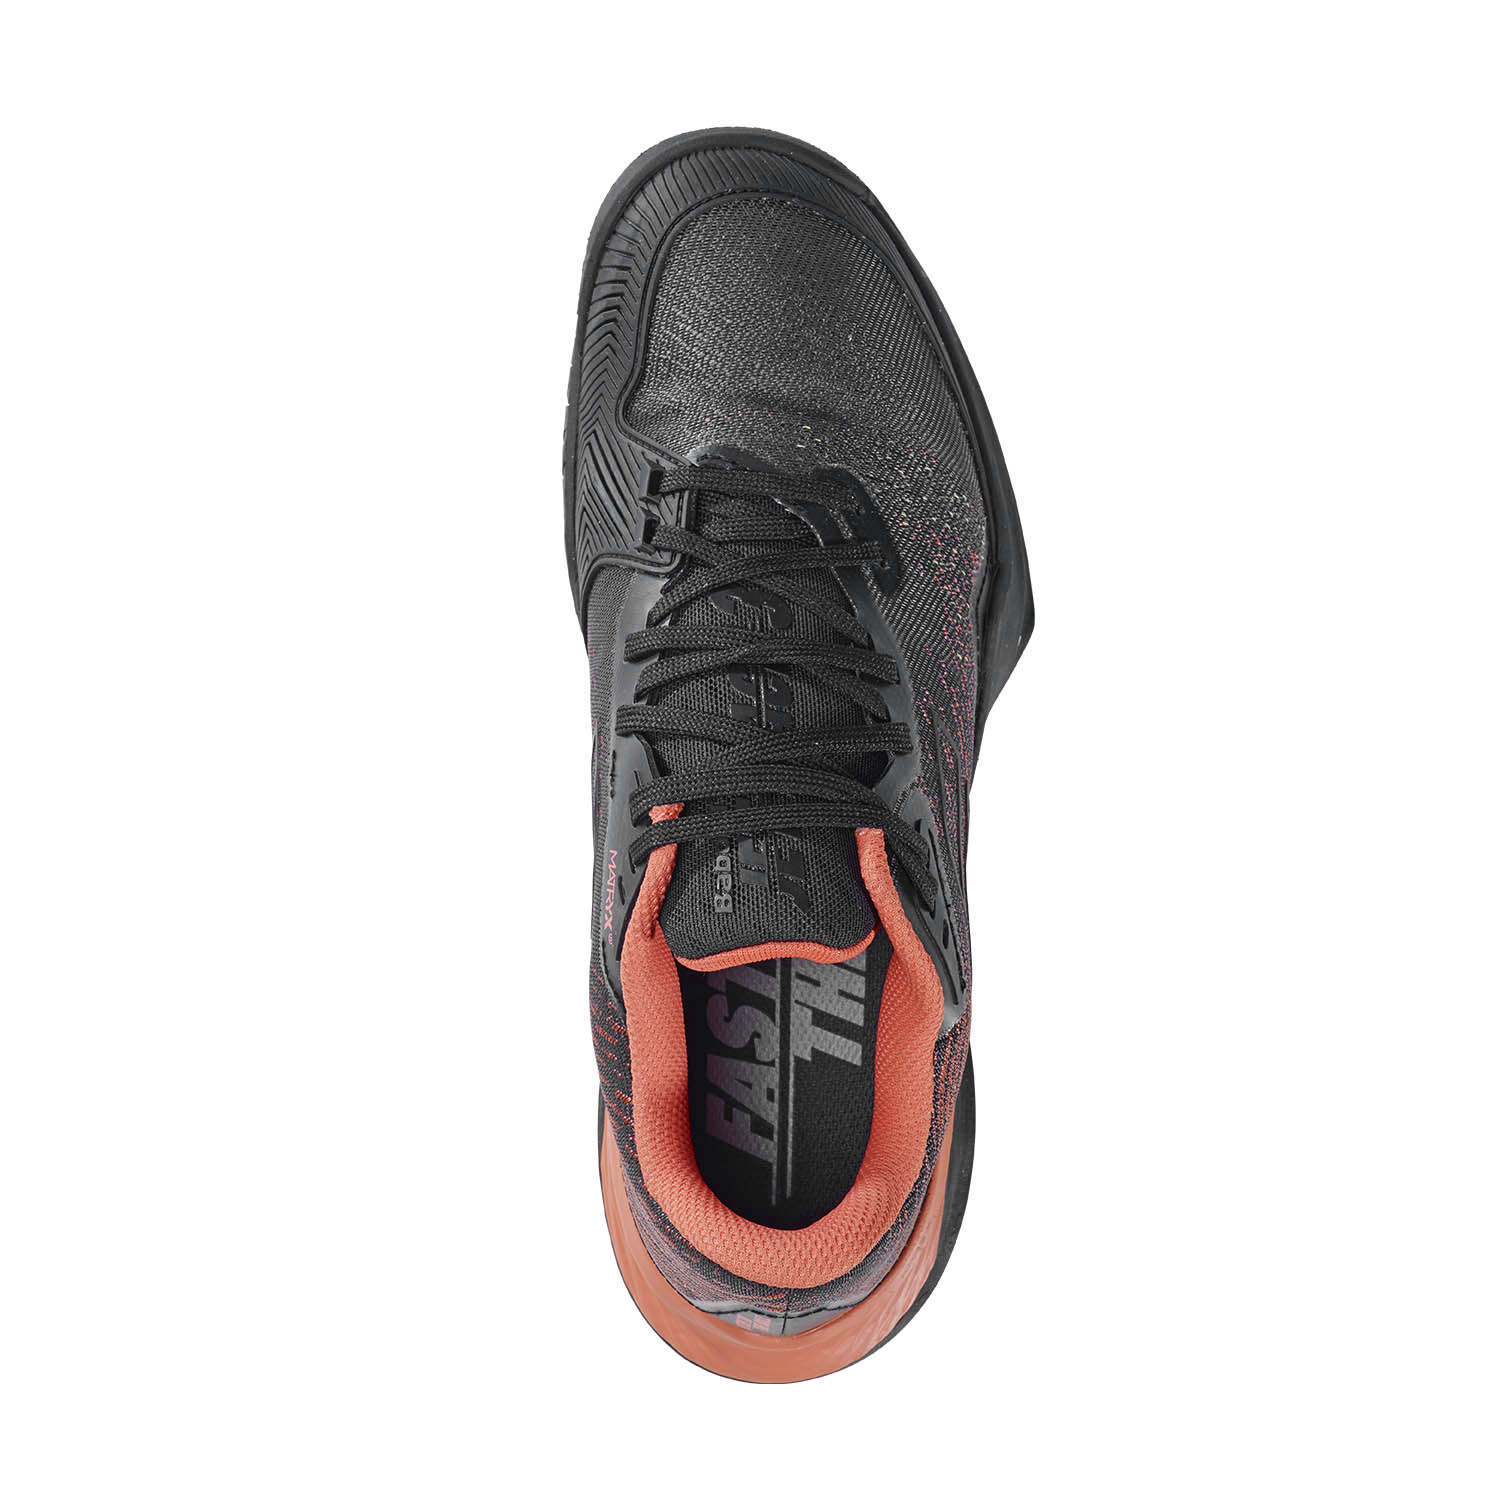 Babolat Jet Mach 3 All Court - Black/Living Coral